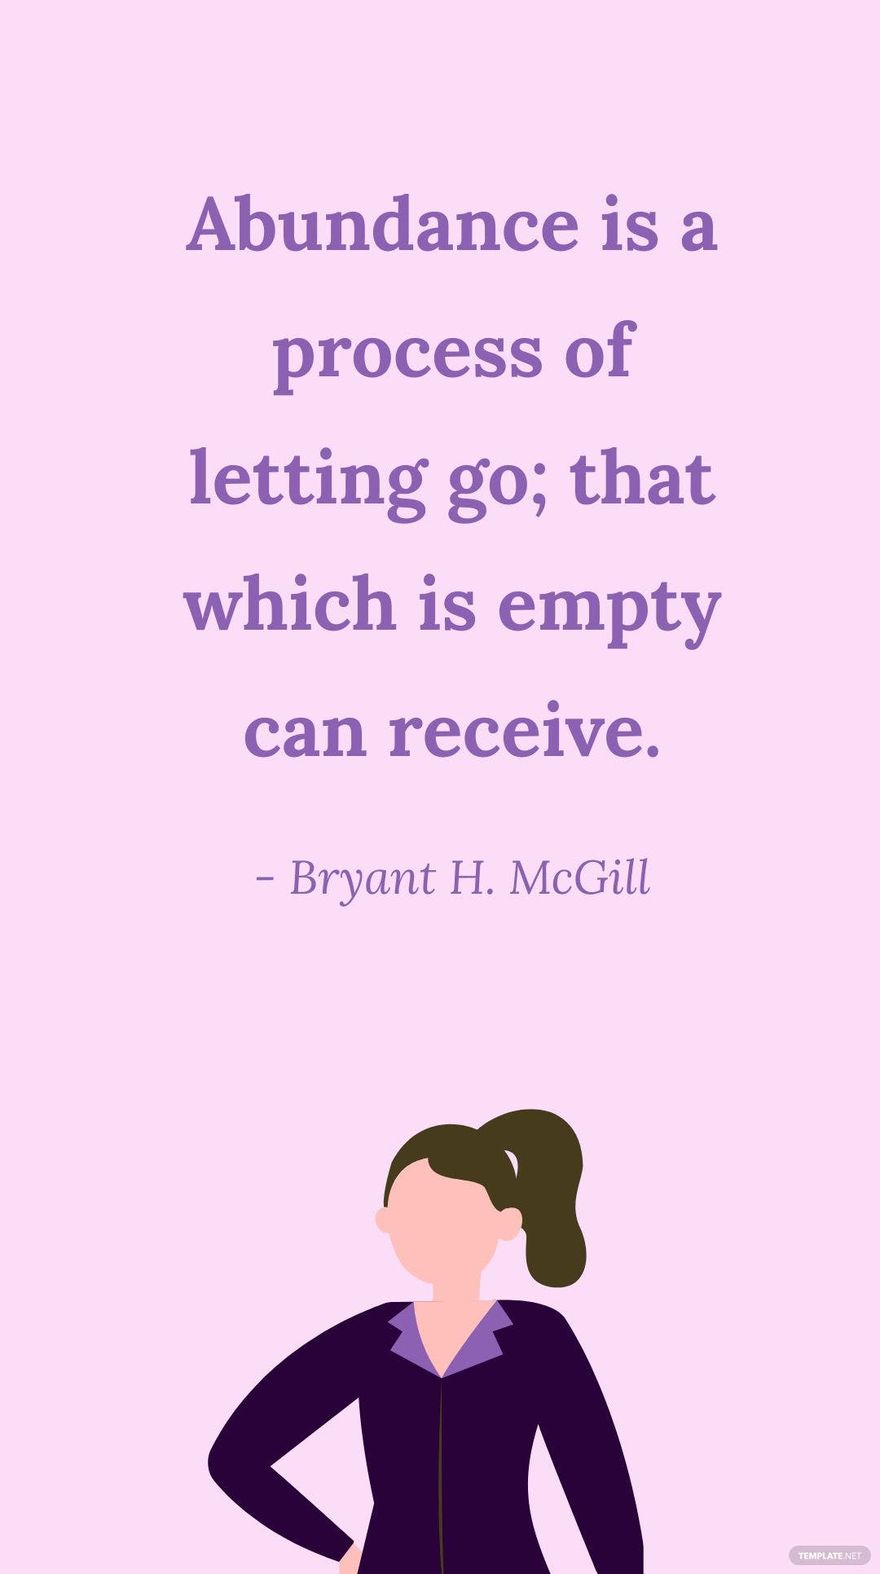 Free Bryant H. McGill - Abundance is a process of letting go; that which is empty can receive. in JPG